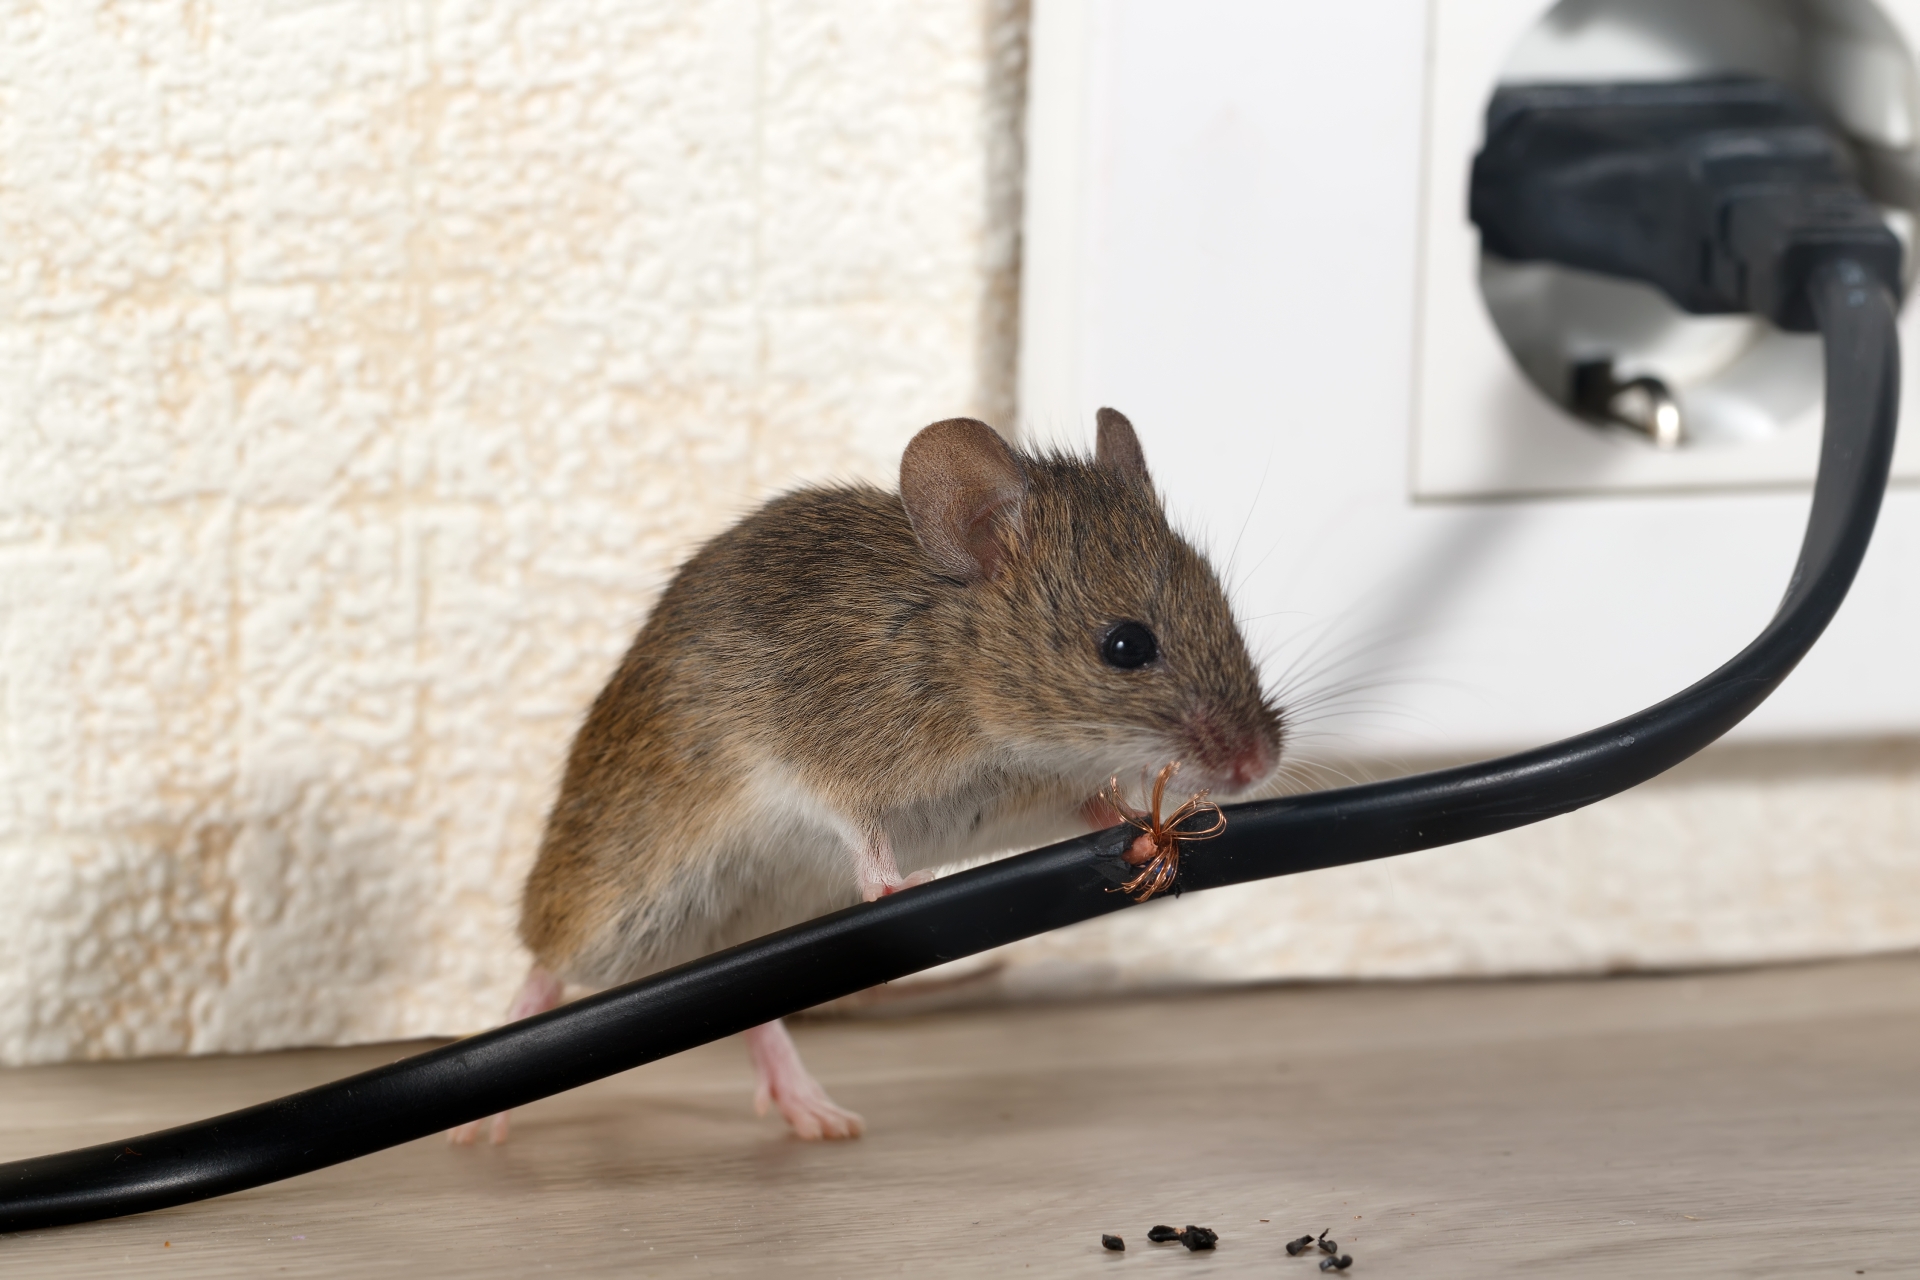 Mice Infestation, Pest Control in Southfleet, Meopham, DA13. Call Now 020 8166 9746